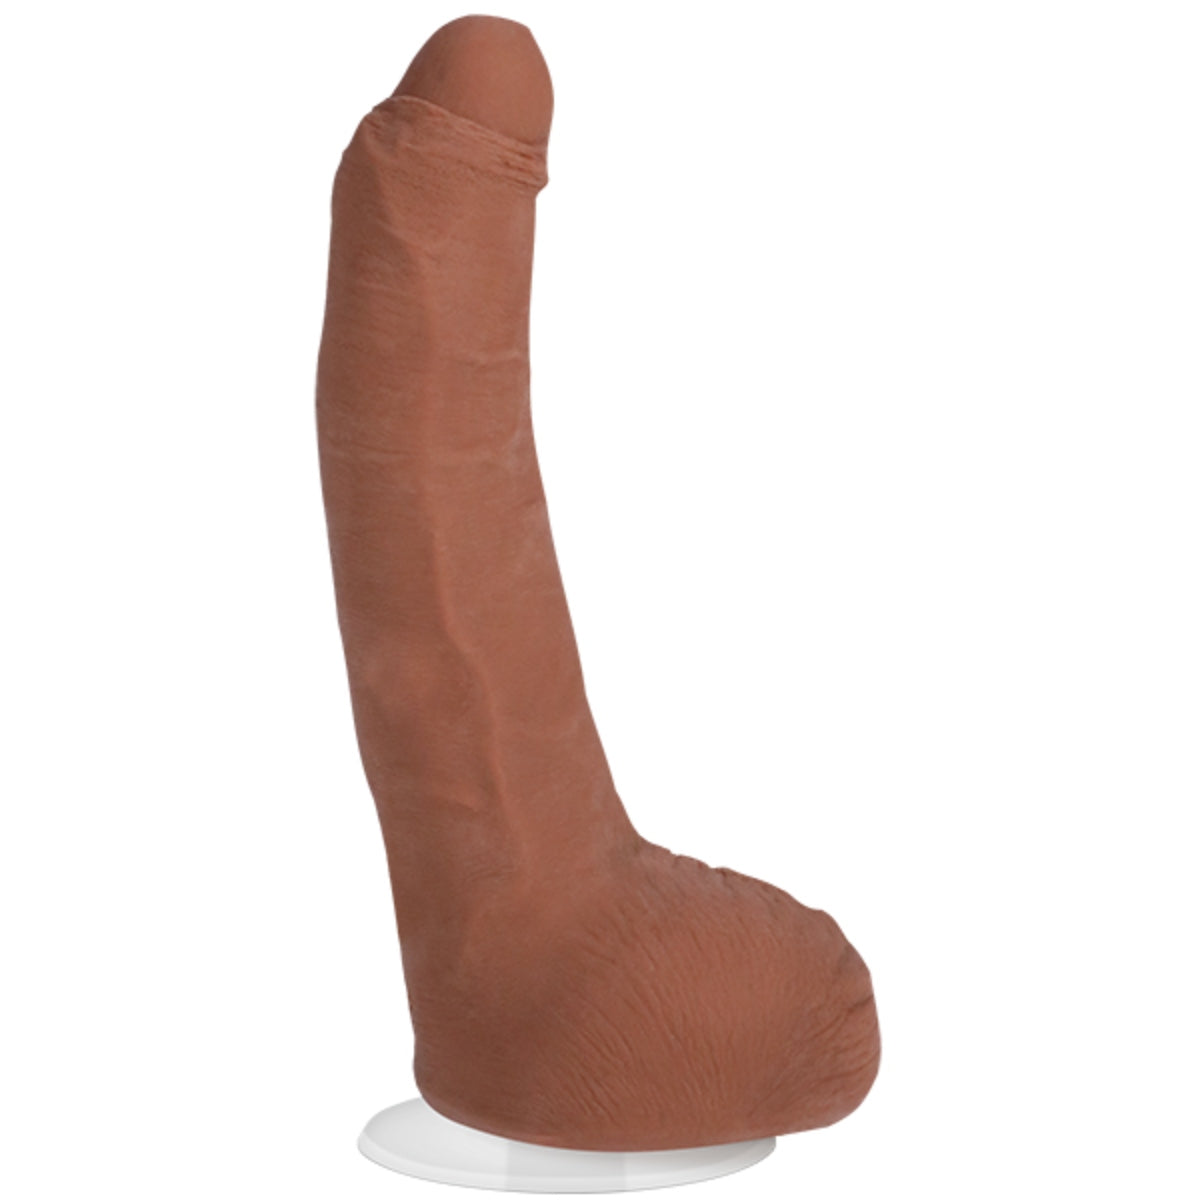 Signature Cocks Leo Vice 6 Inch Ultraskyn Cock with Removable Vac-U-Lock Suction Cup